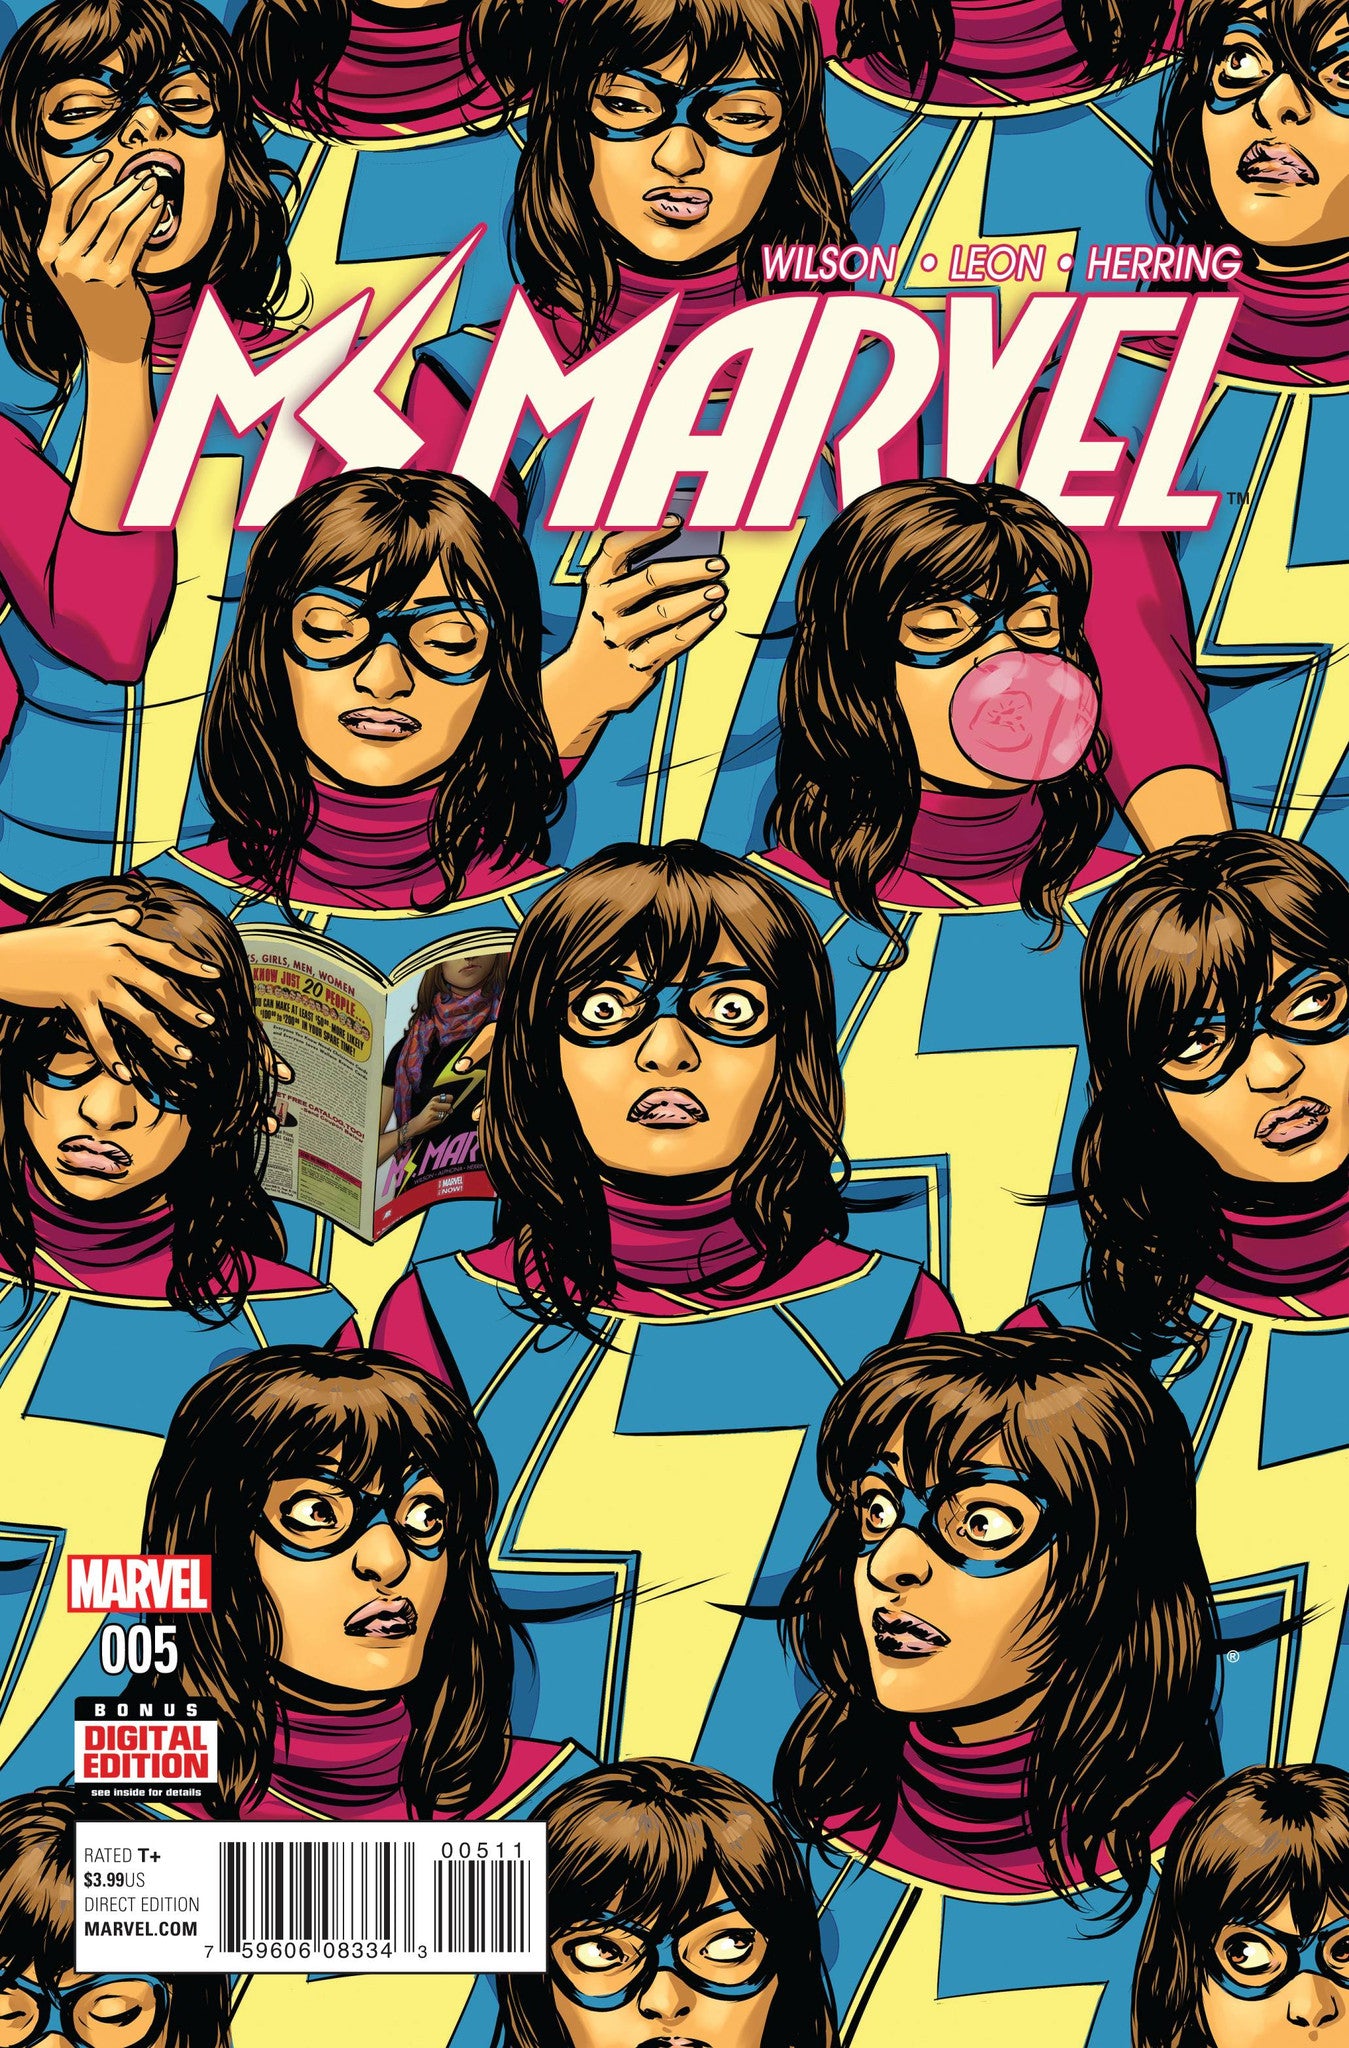 MS MARVEL #5 COVER